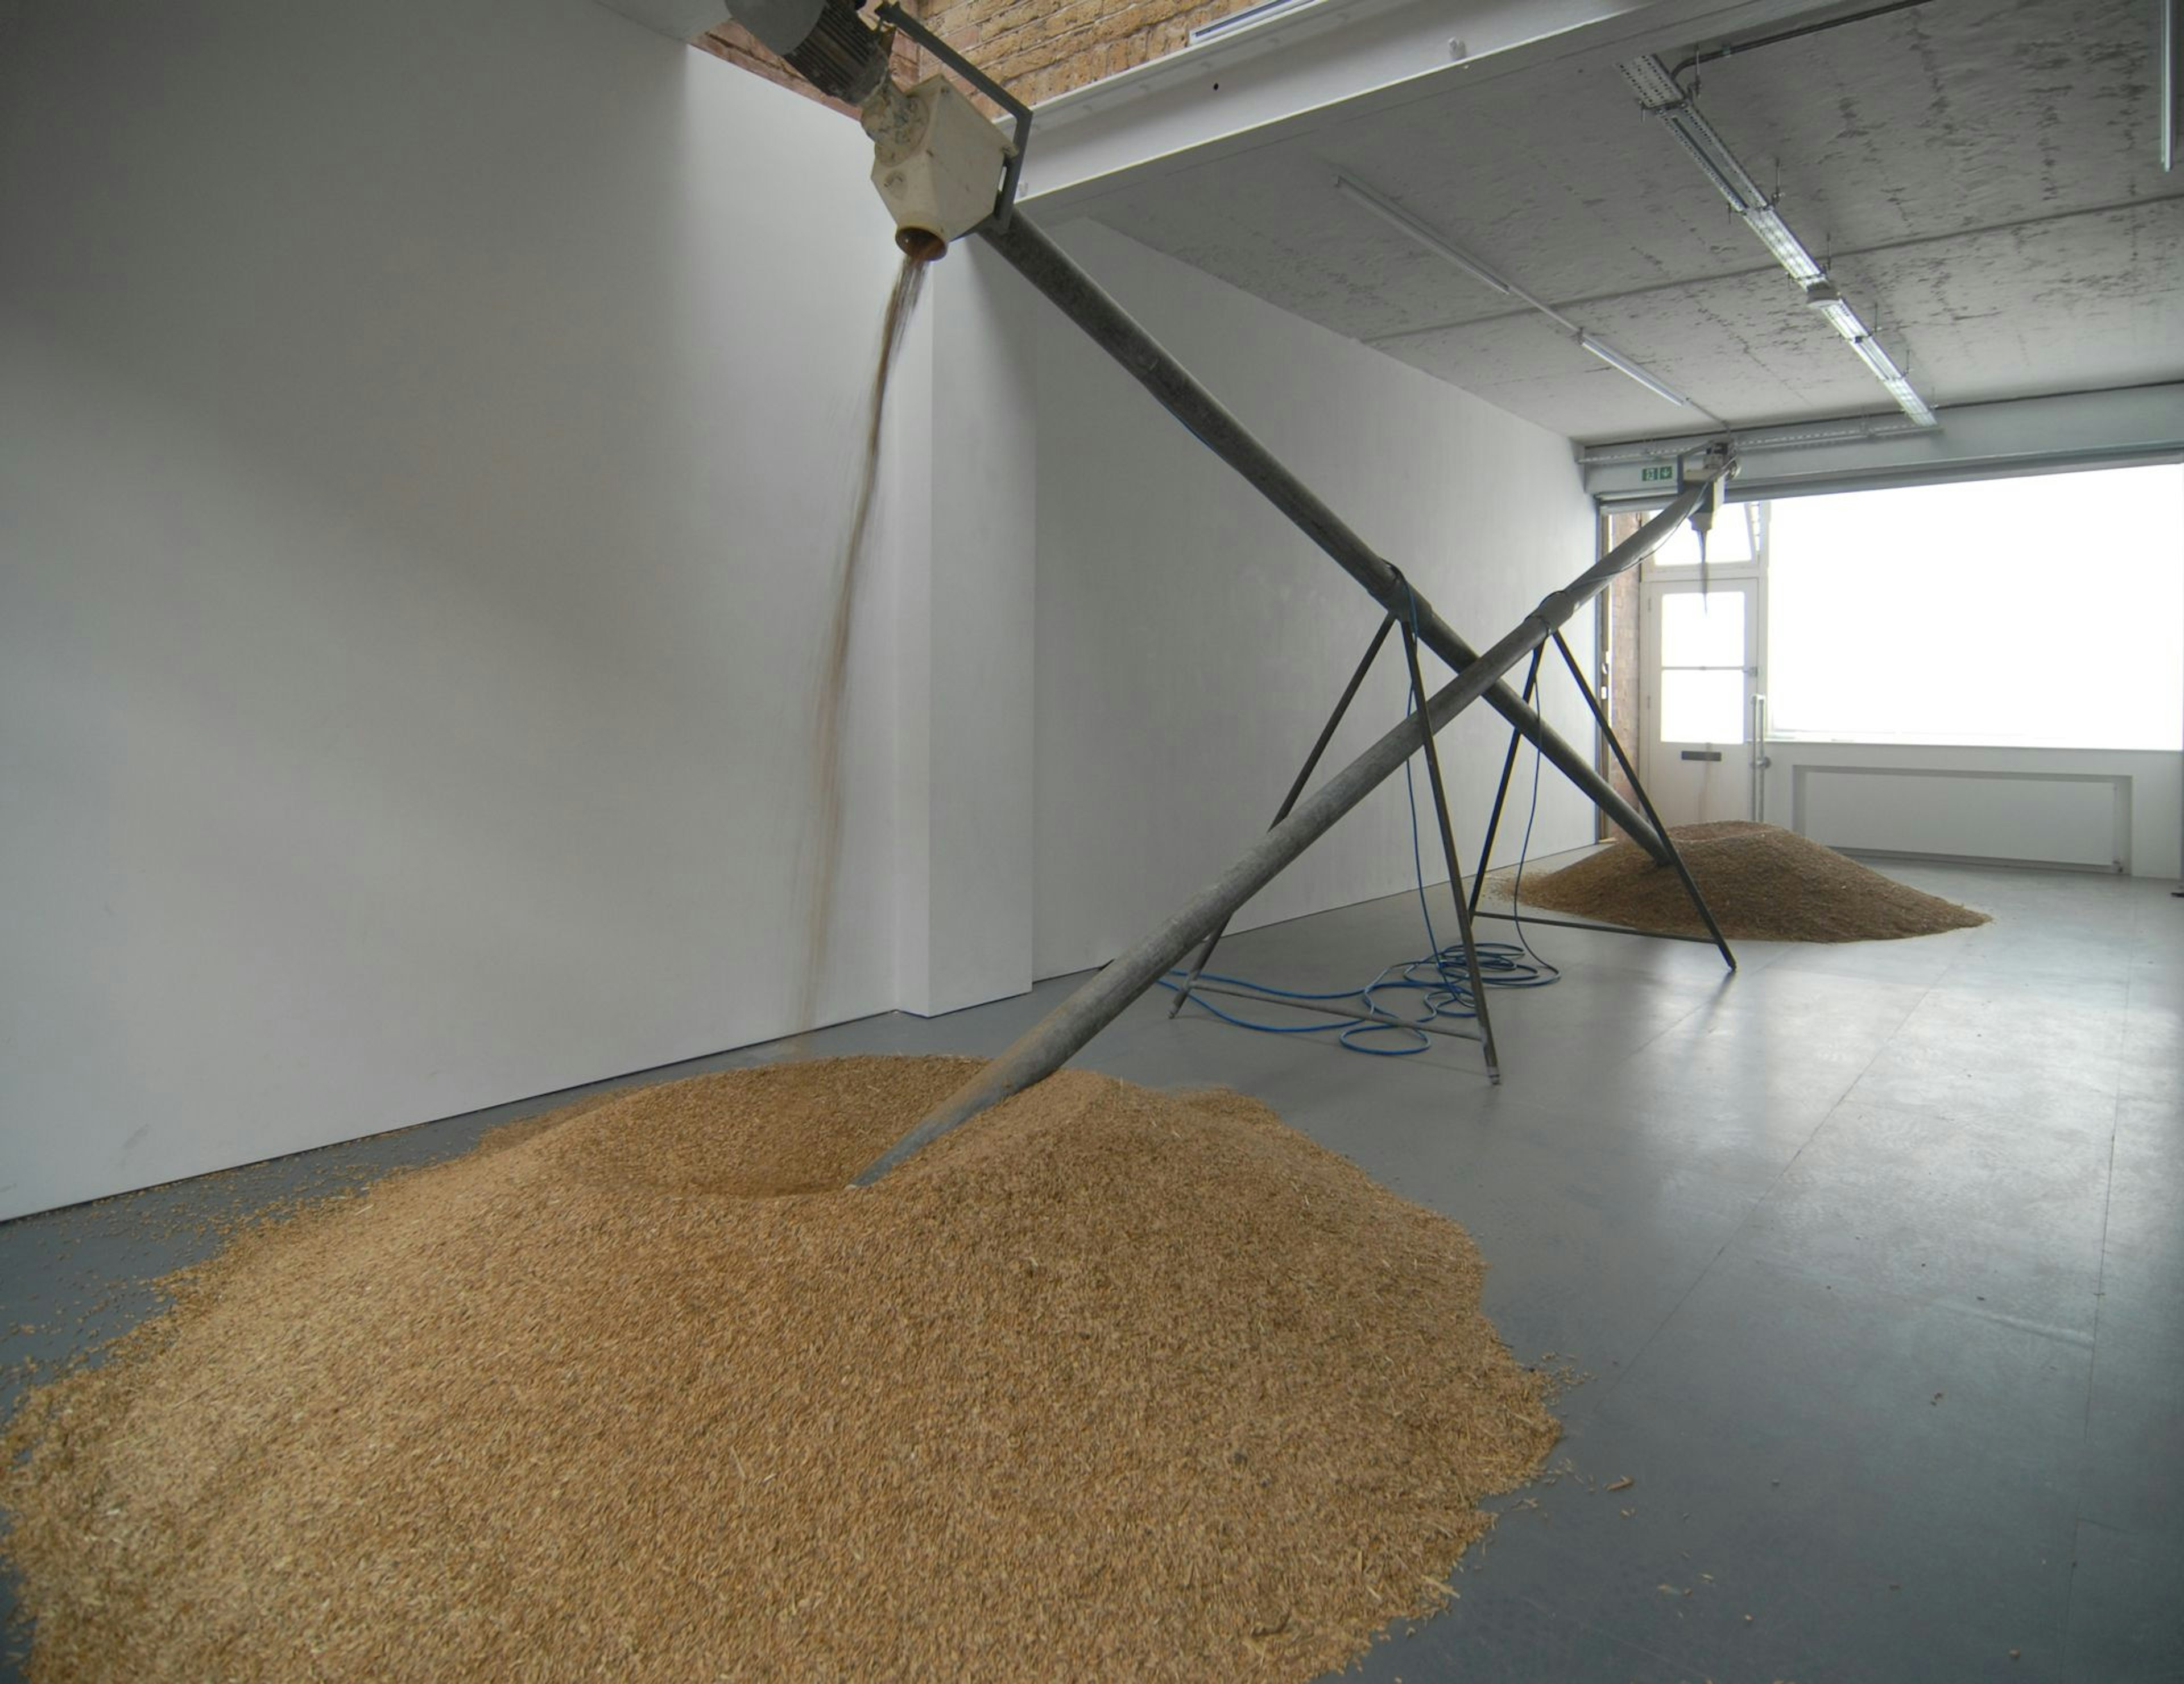 Two agricultural grain augers installed in no show gallery with two piles of grain